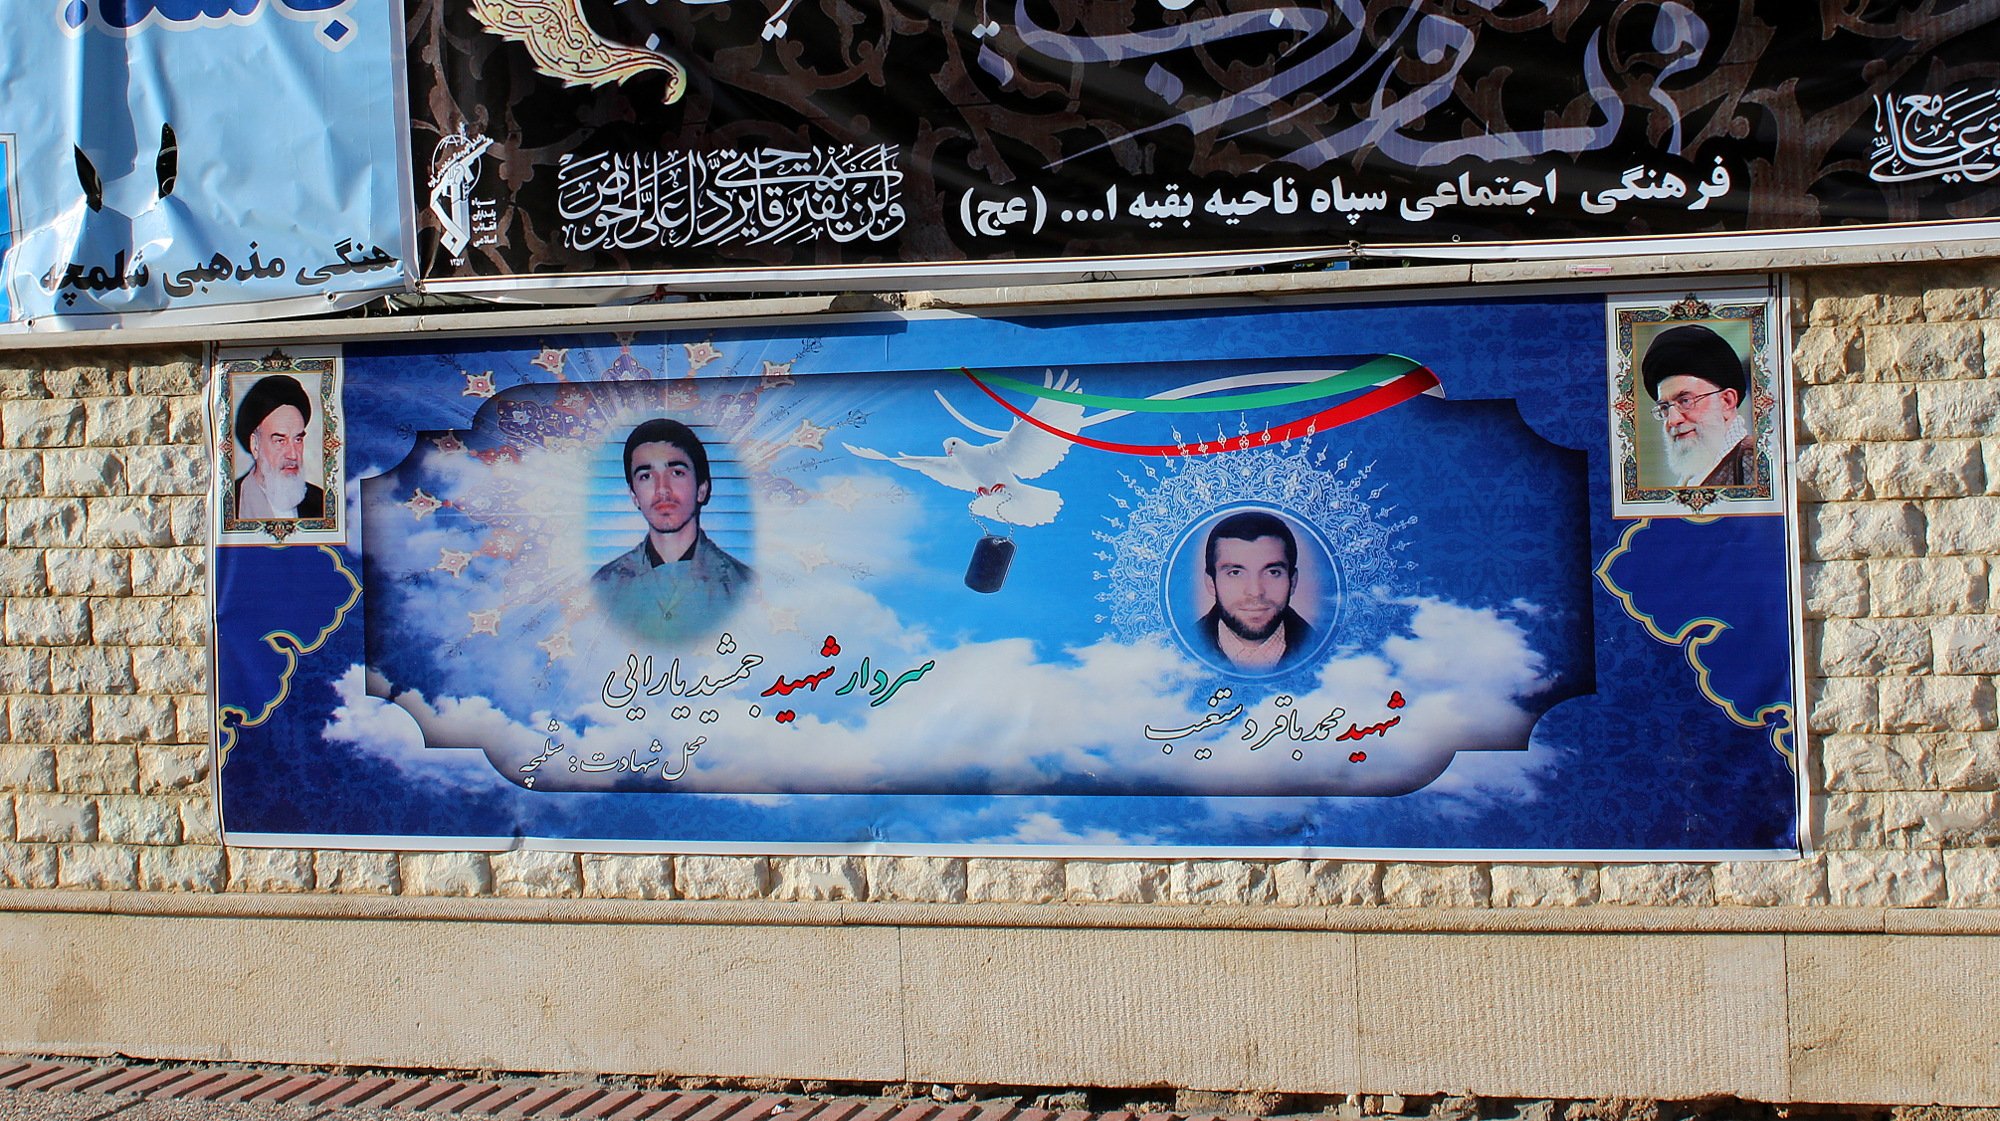 A poster of the Supreme Leaders of Iran and two assassinated nuclear scientists on the wall of a building.